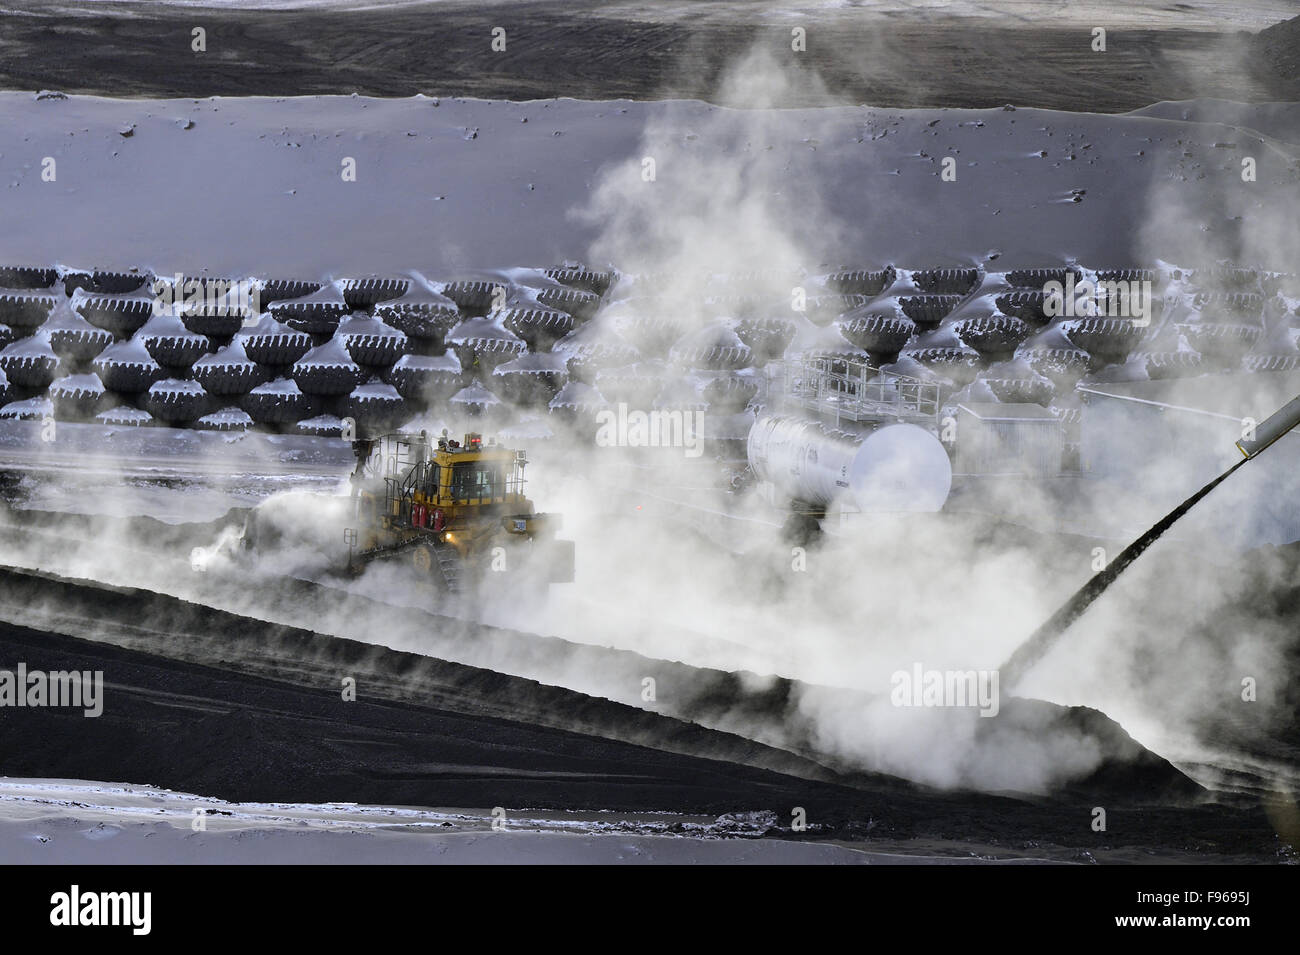 Steam from the hot coal surrounds the bull dozer as it pushes the fresh coal product into a pile at the Luscar coal mine's Stock Photo